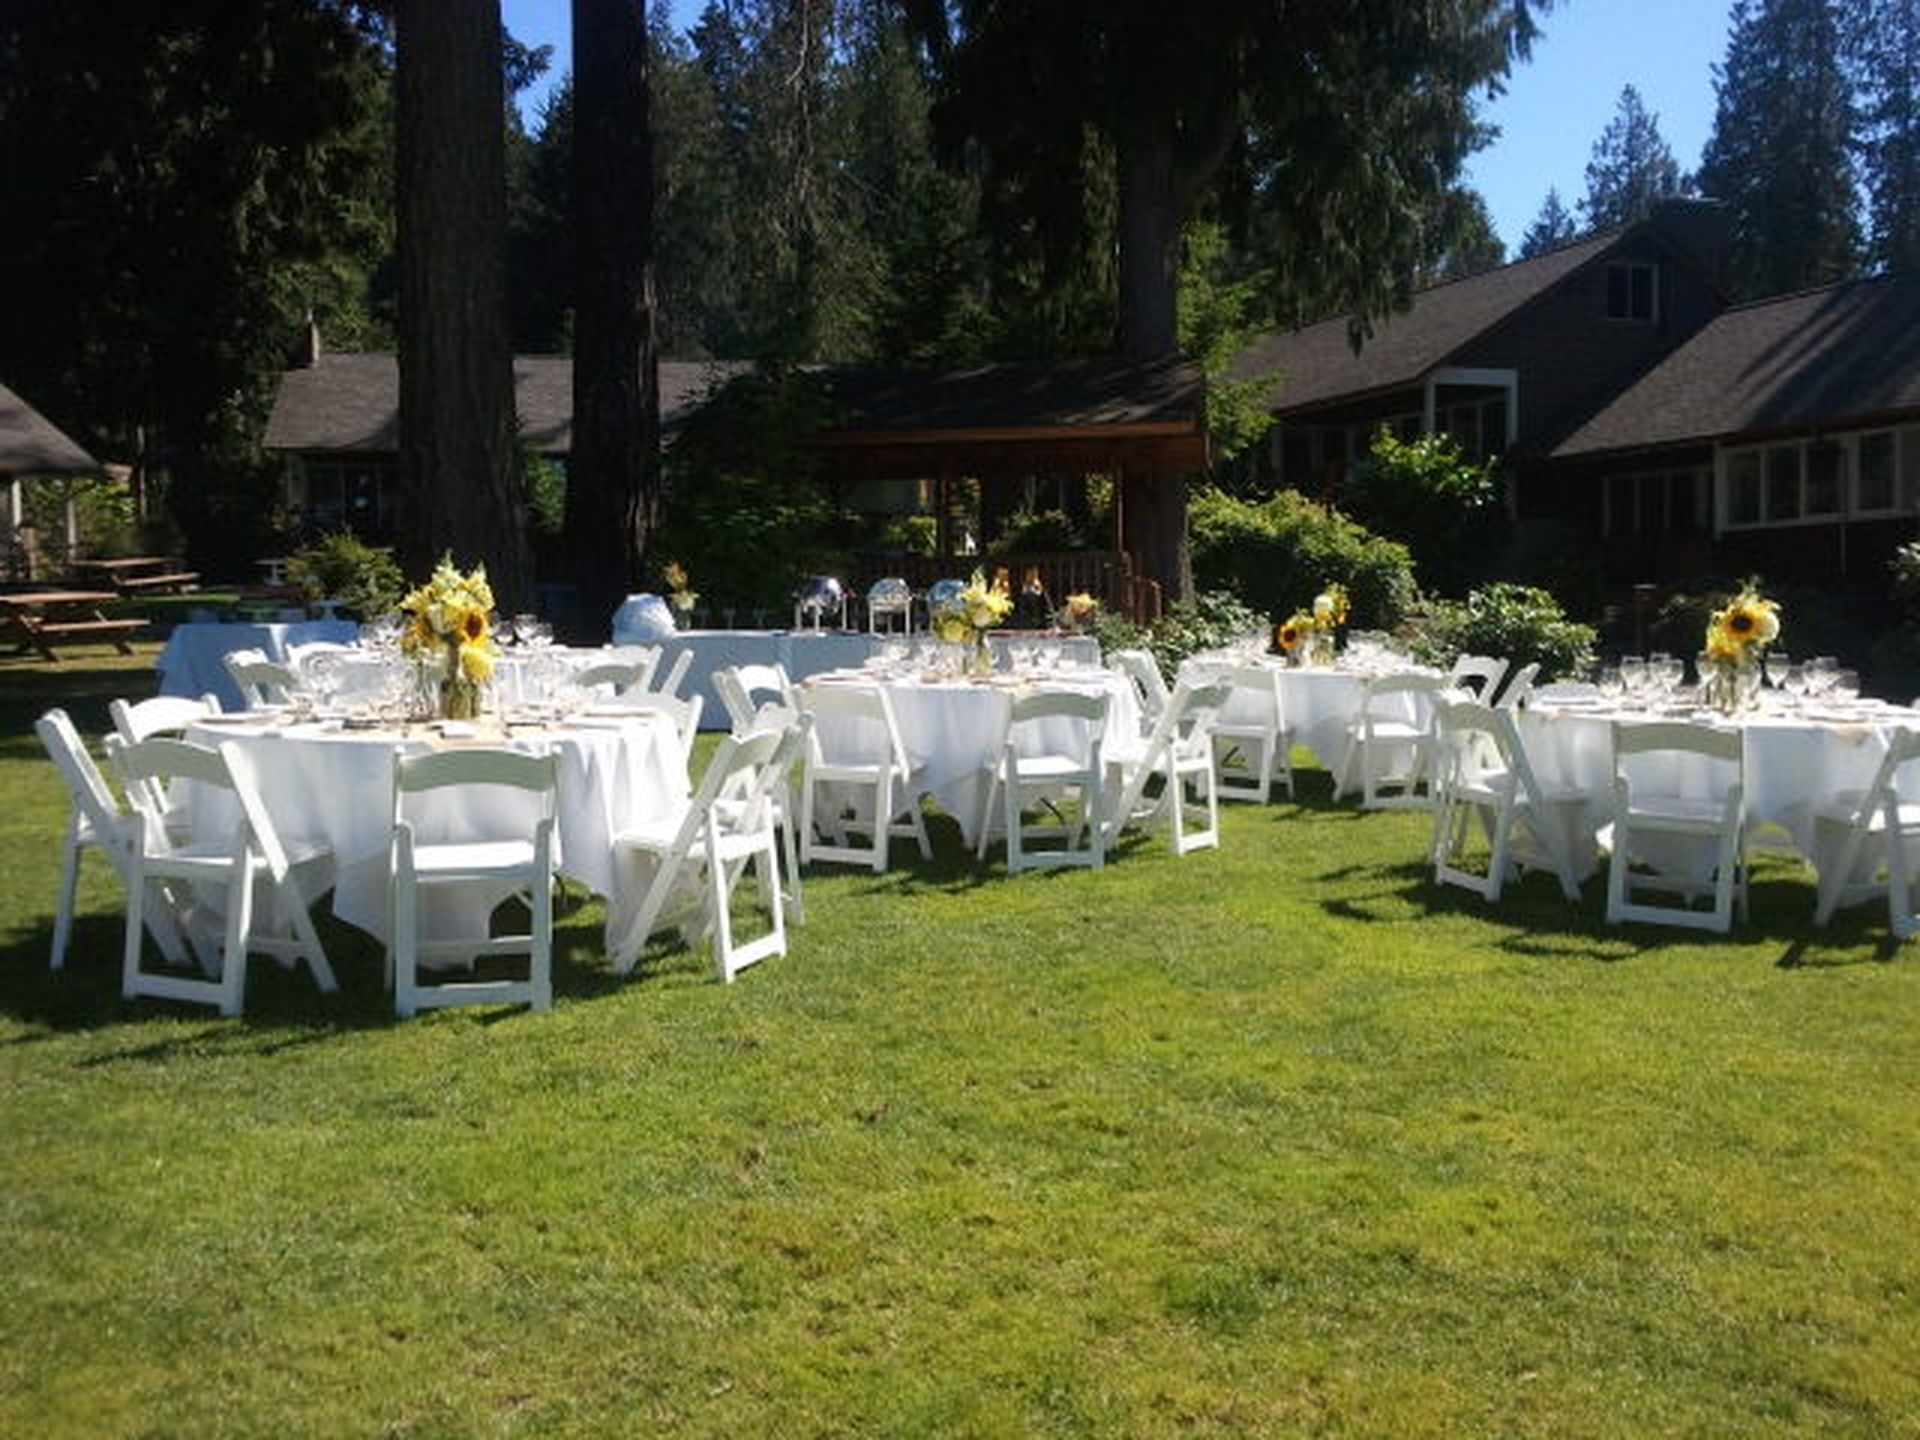 Banquet table set-up for a wedding event arranged outdoors on Cottage Lawn at Alderbrook Resort & Spa